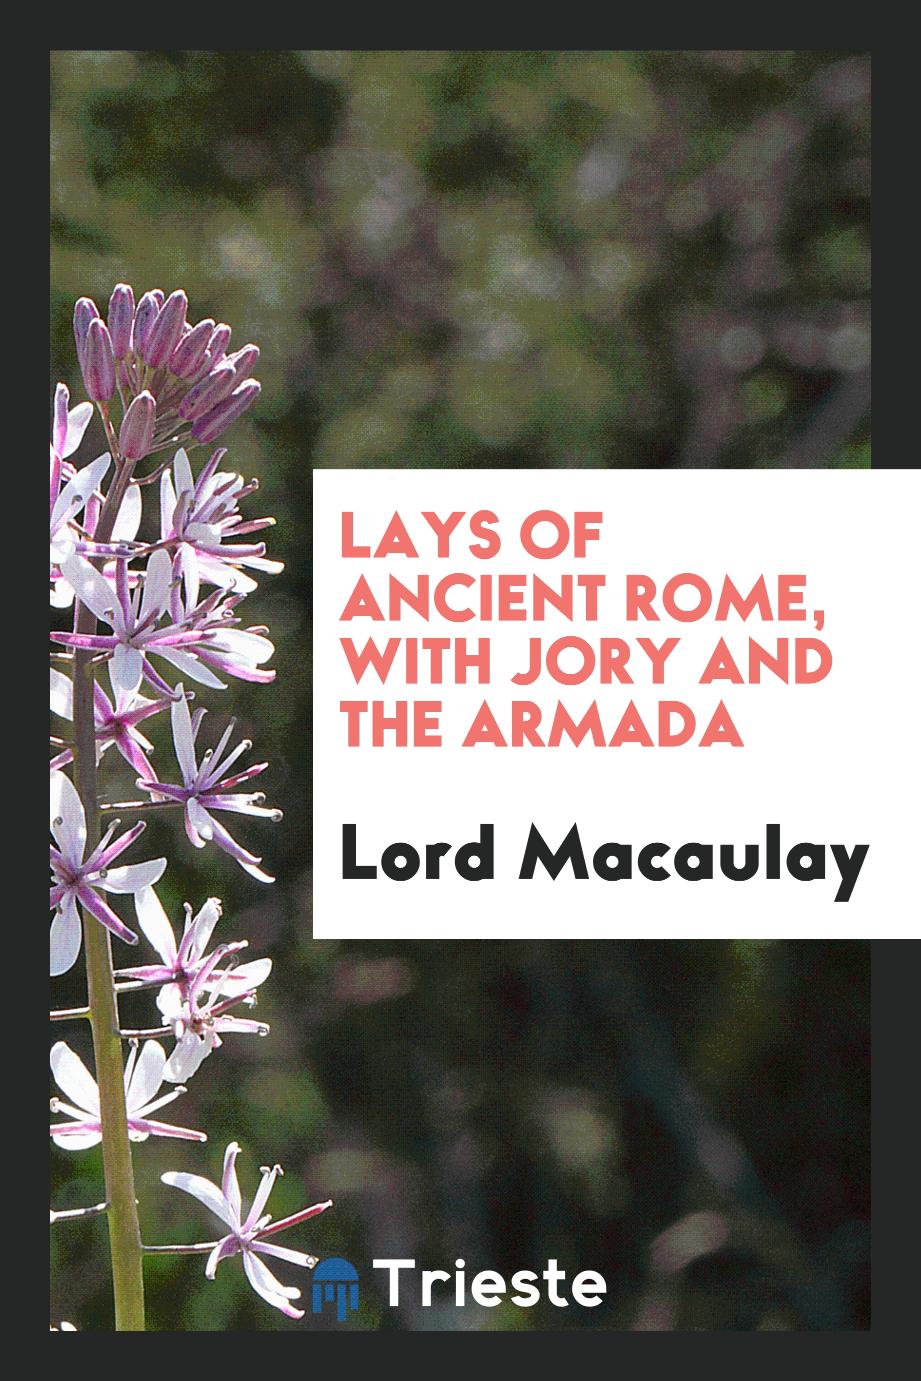 Lays of Ancient Rome, with Jory and the Armada